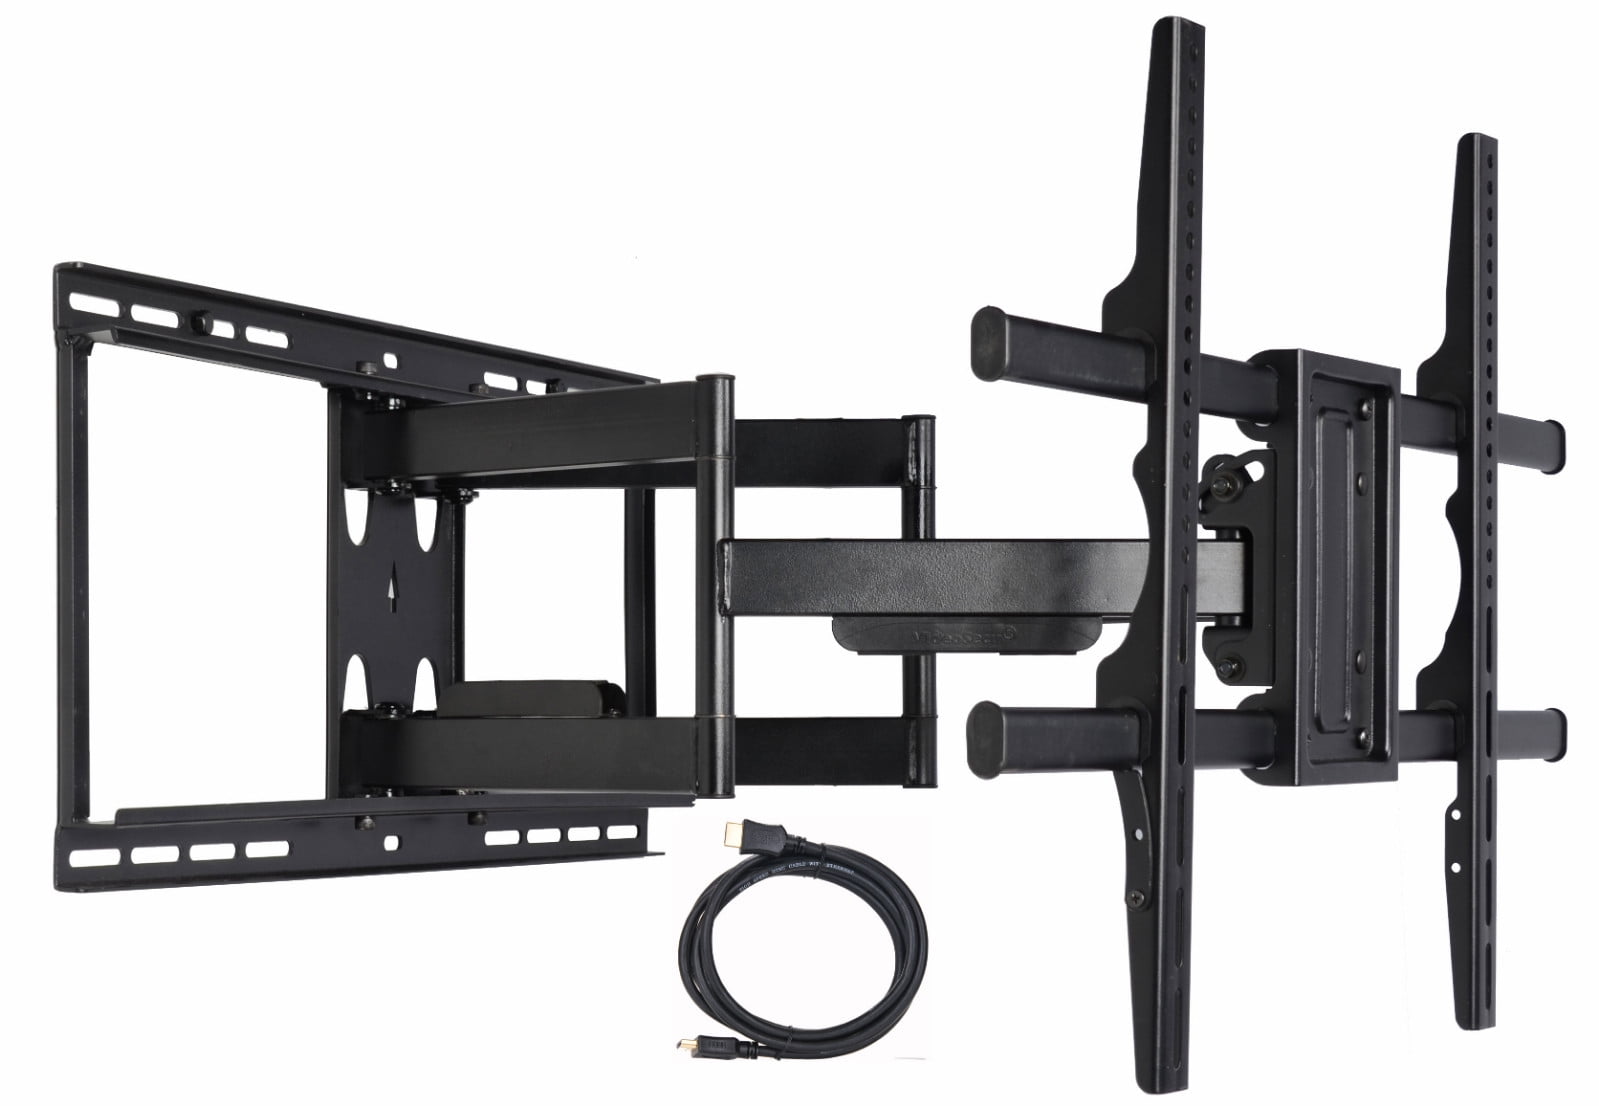 Full Motion LCD LED Articulating TV Wall Mount 50 55 60 65 70 75 78 80 85 88 90" 